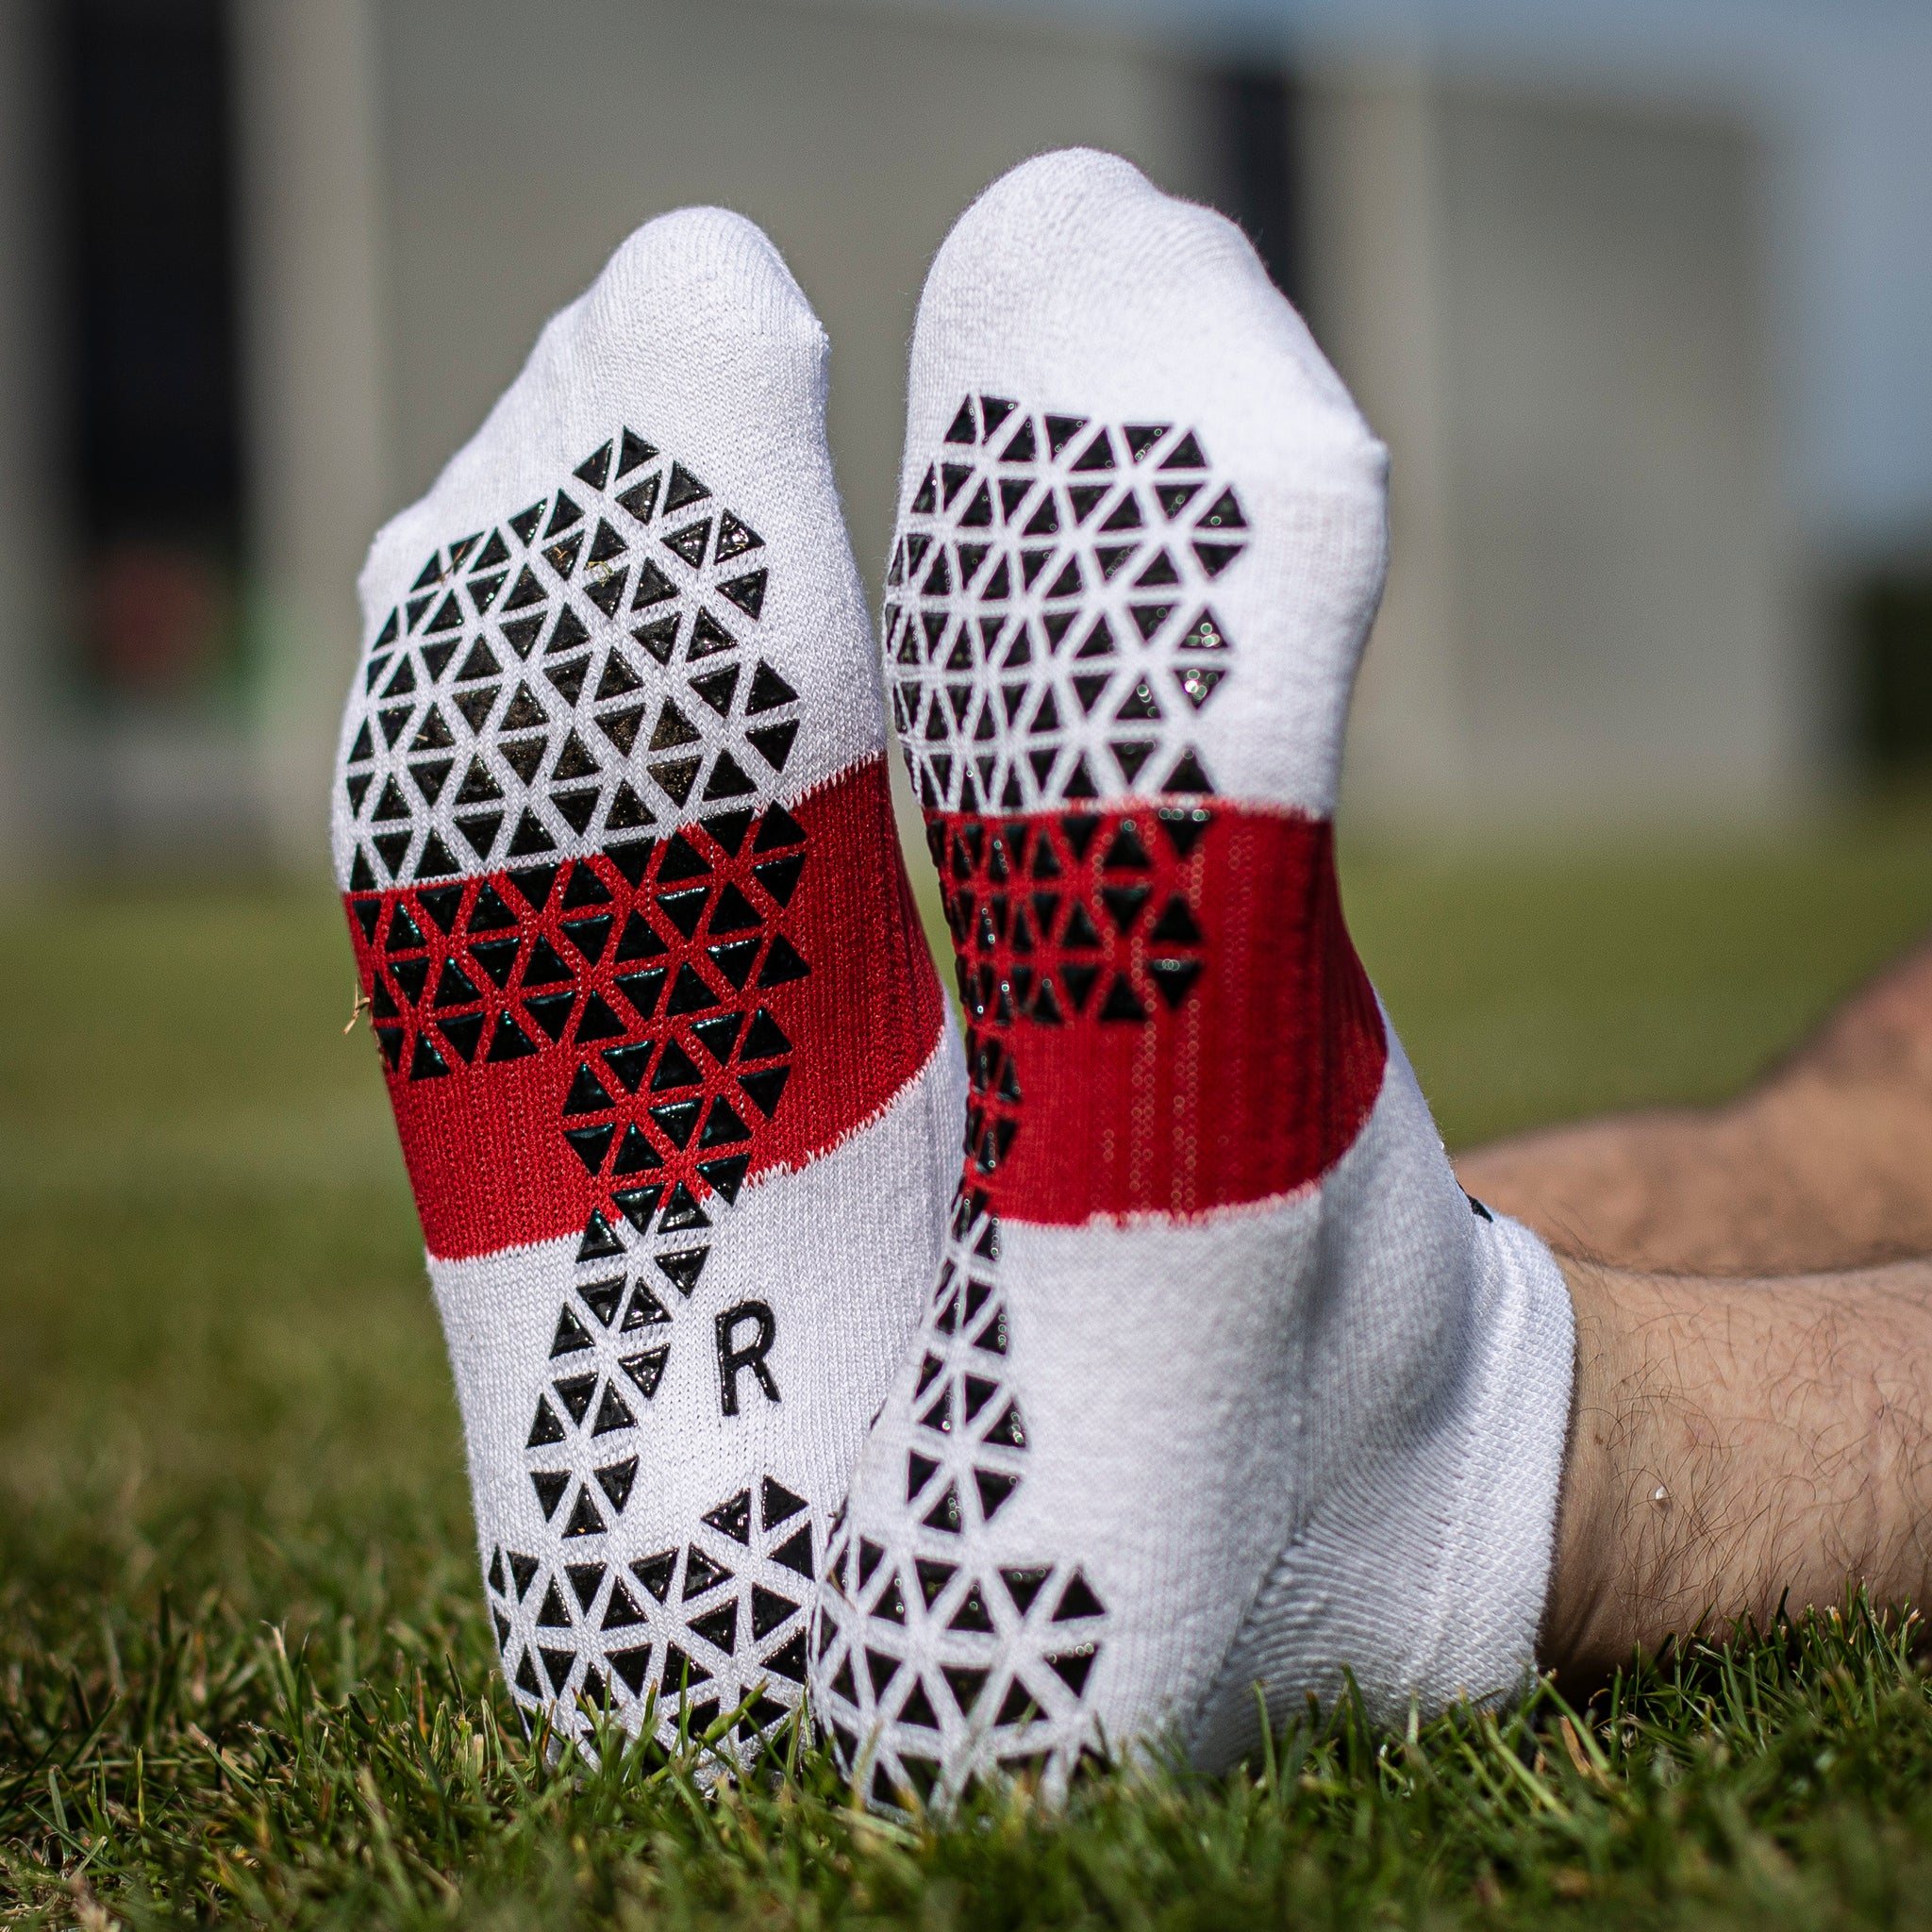 Pure Grip Socks Pro Whiteout Small (3 - 6.5 US)